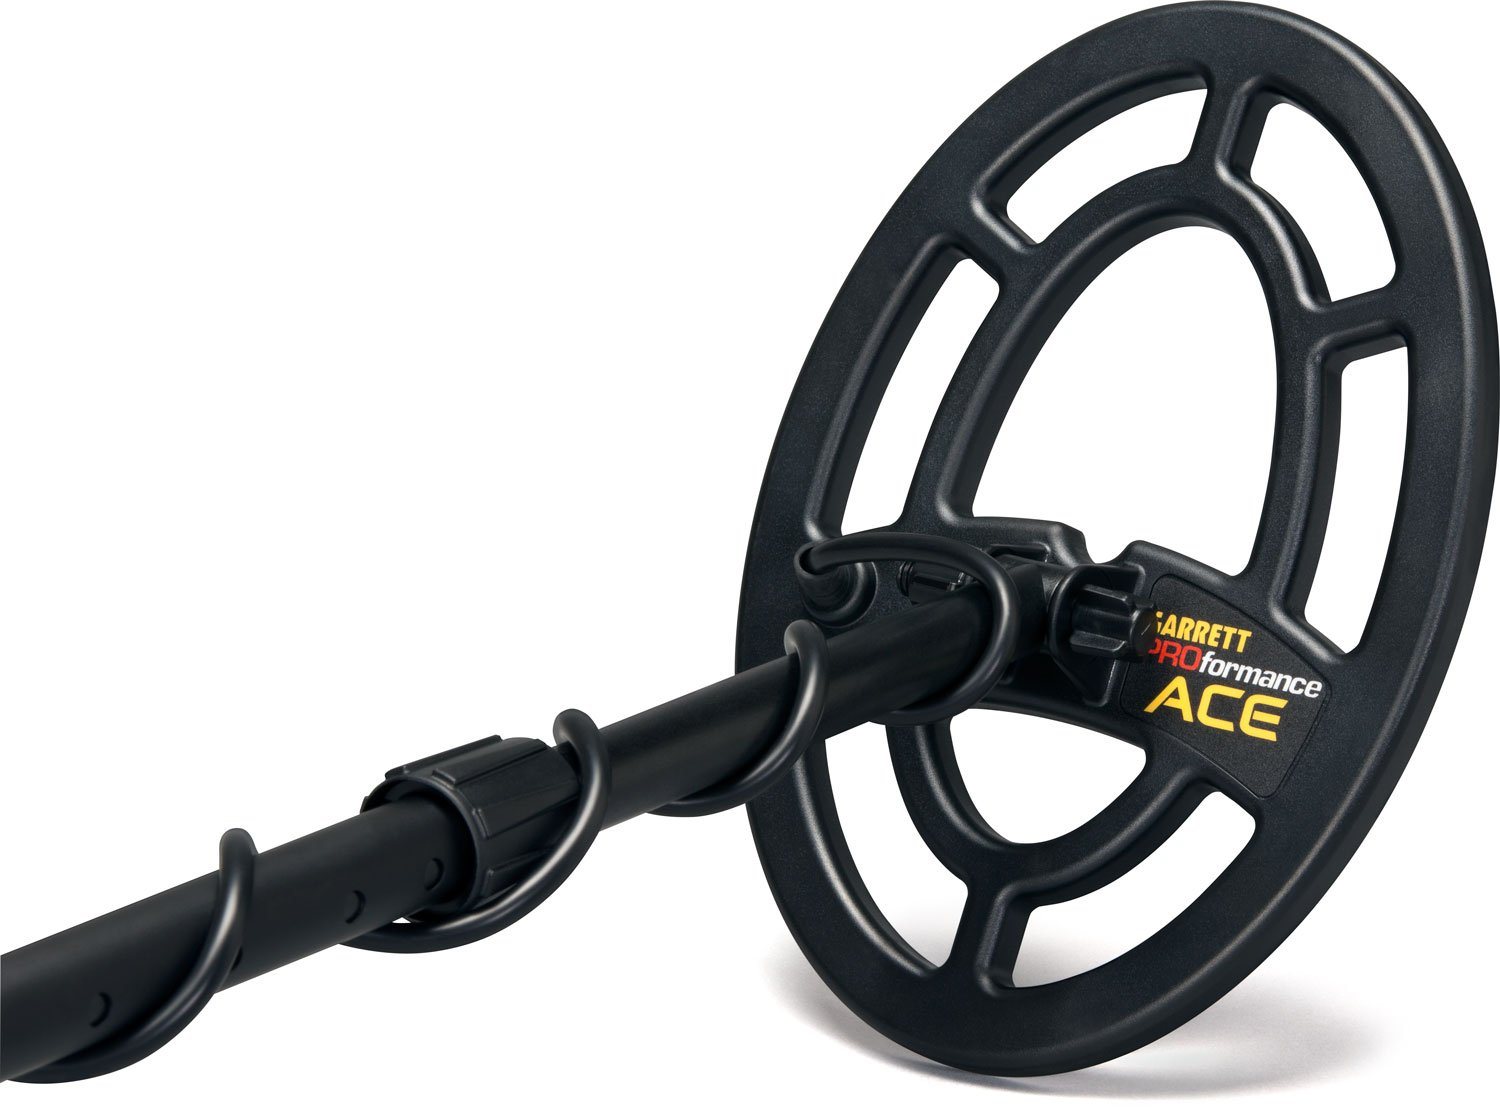 Stock concentric metal detector coil mounted on Garrett ACE 300 metal detector.